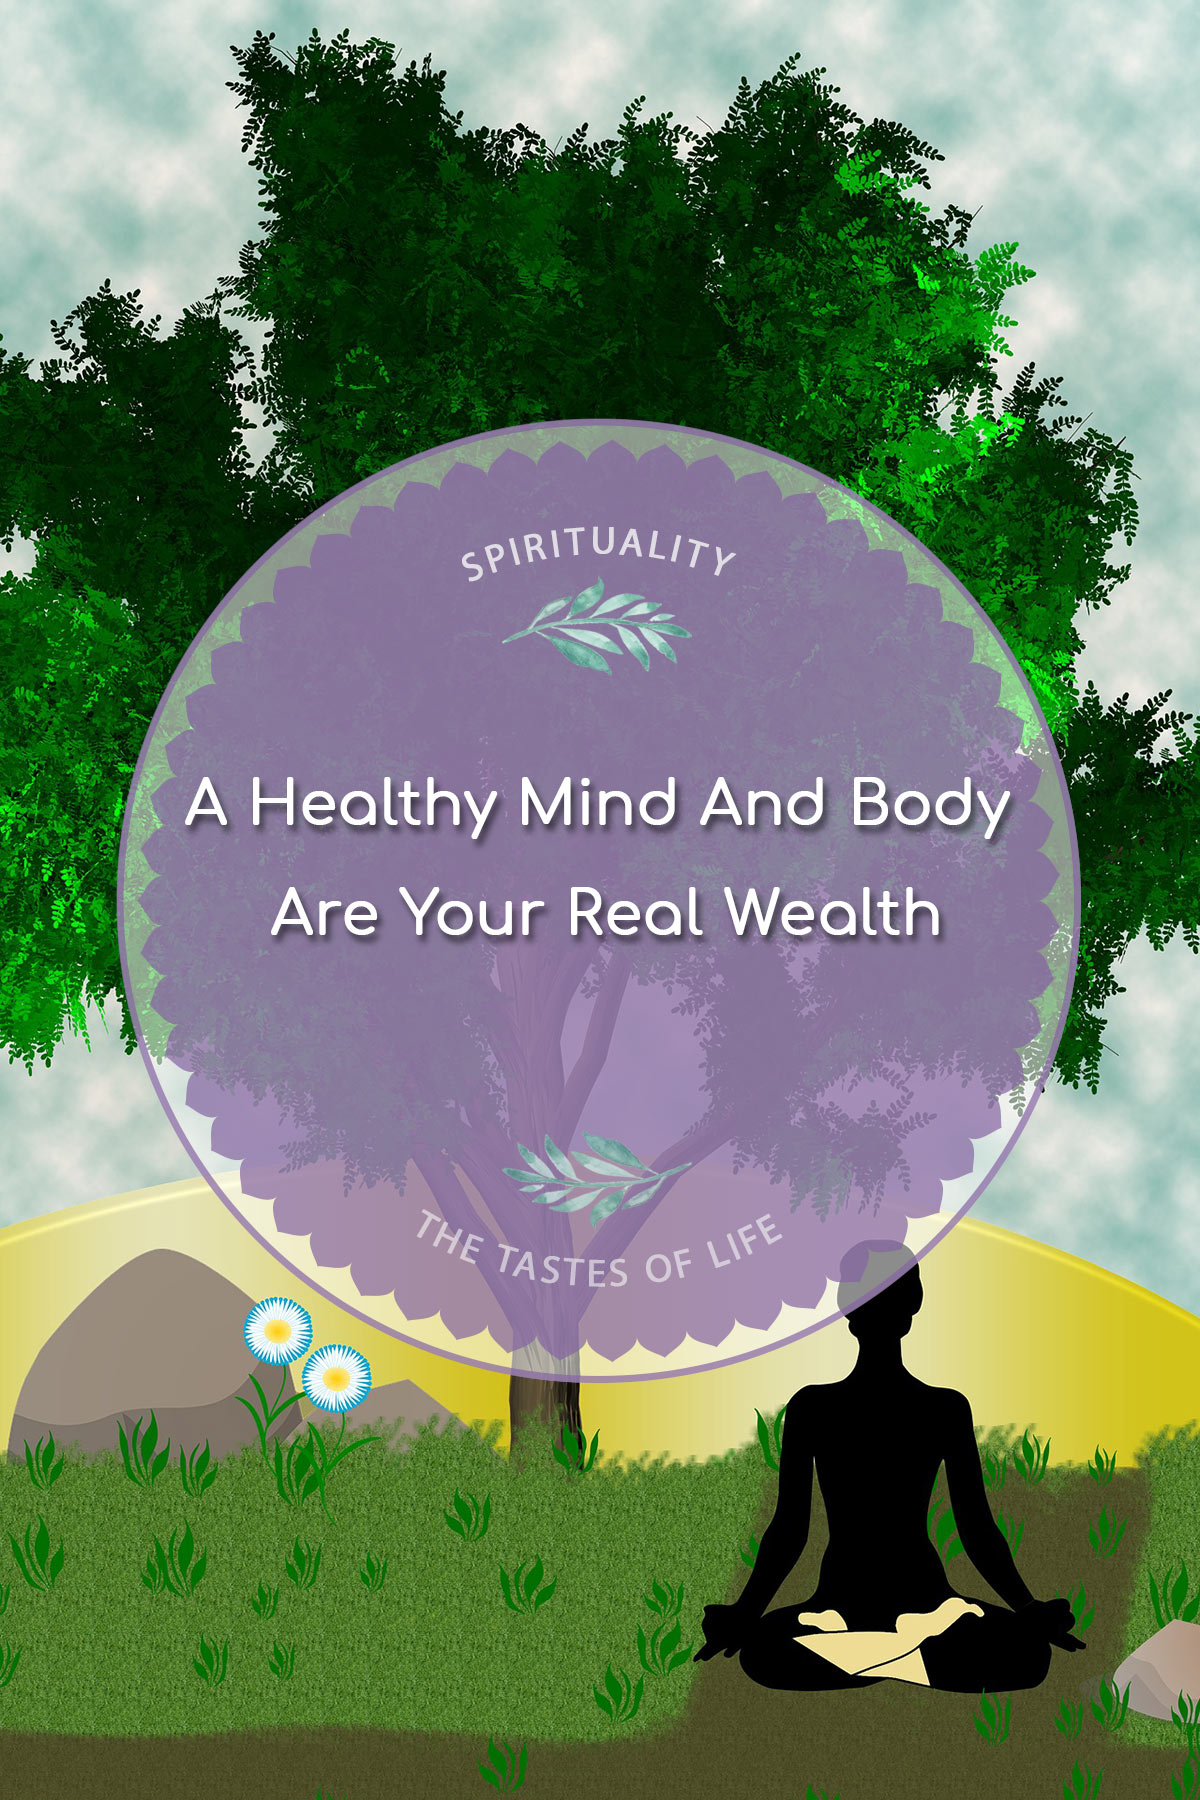 A Healthy Mind And Body Are Your Real Wealth